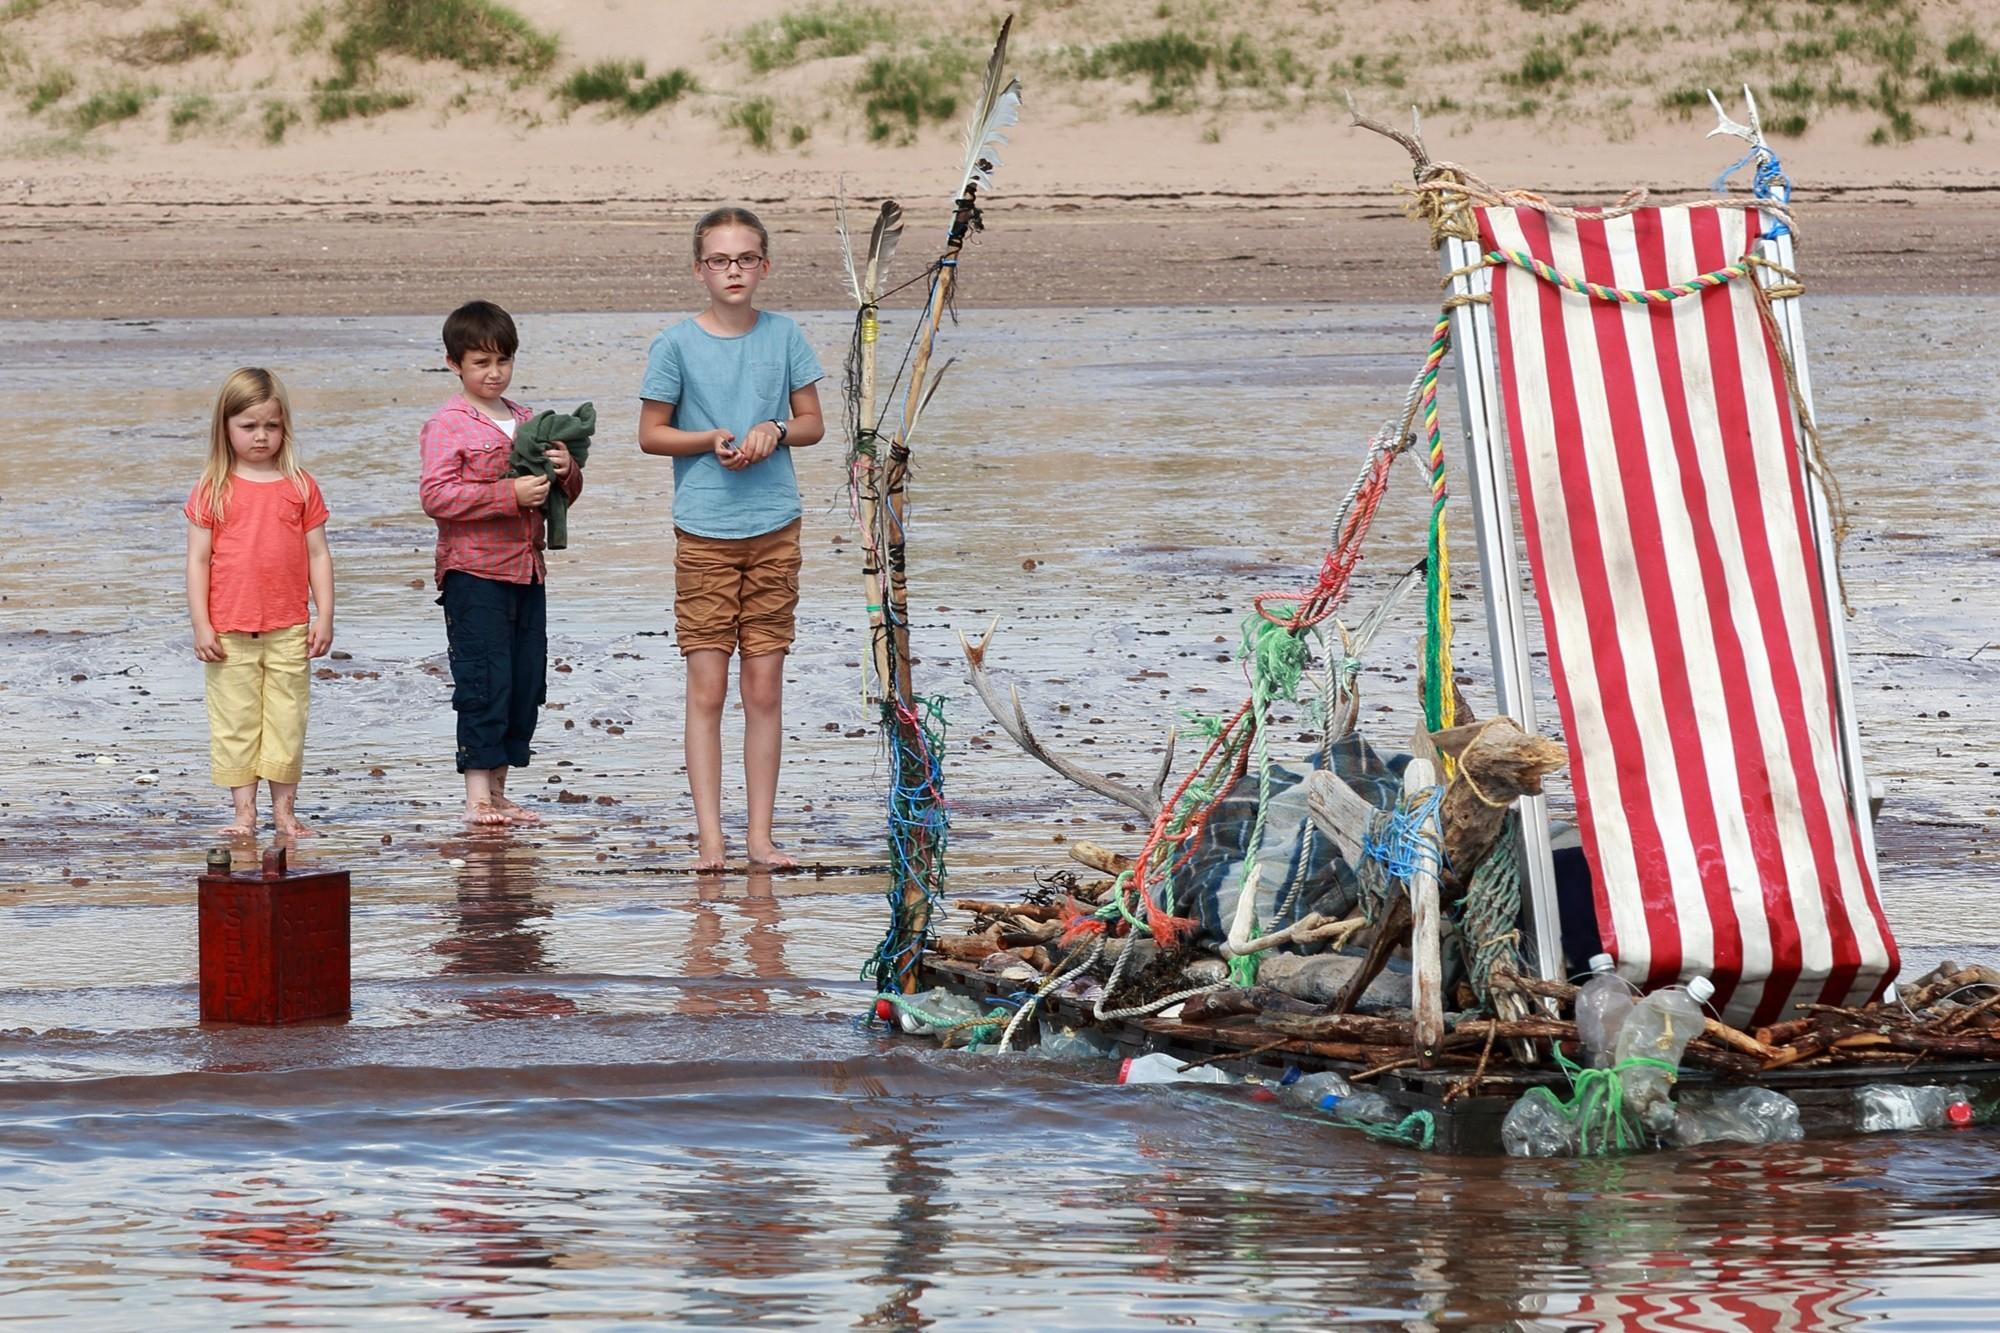 Harriet Turnbull, Bobby Smalldridge and Emilia Jones in Lionsgate Films' What We Did on Our Holiday (2015)